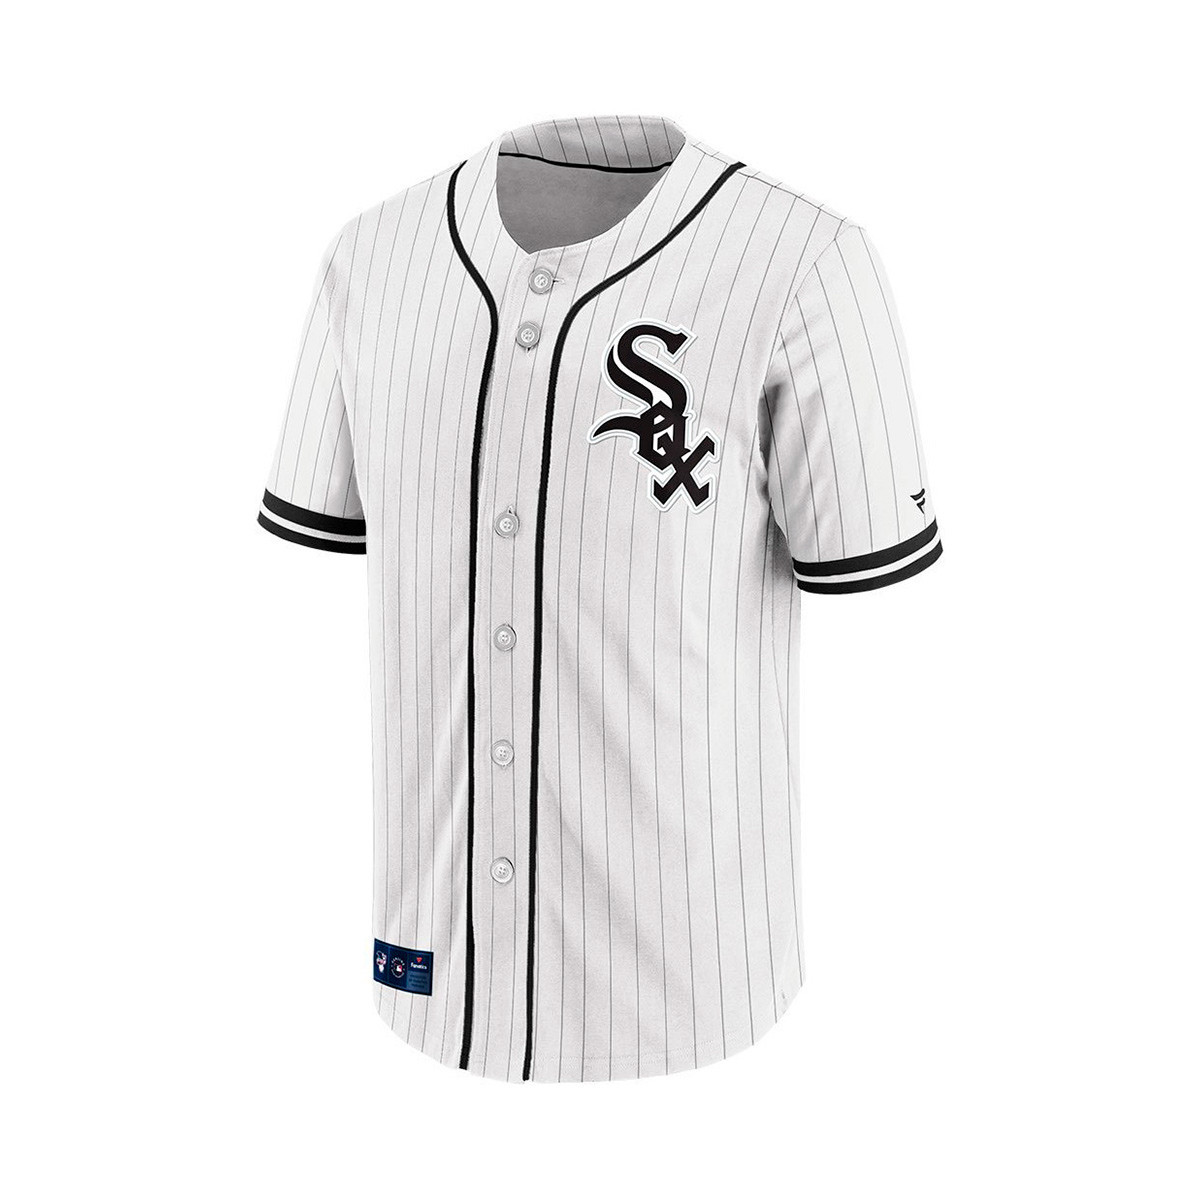 Chicago White Sox Gear, White Sox Jerseys, Chicago Pro Shop, Chicago  Apparel